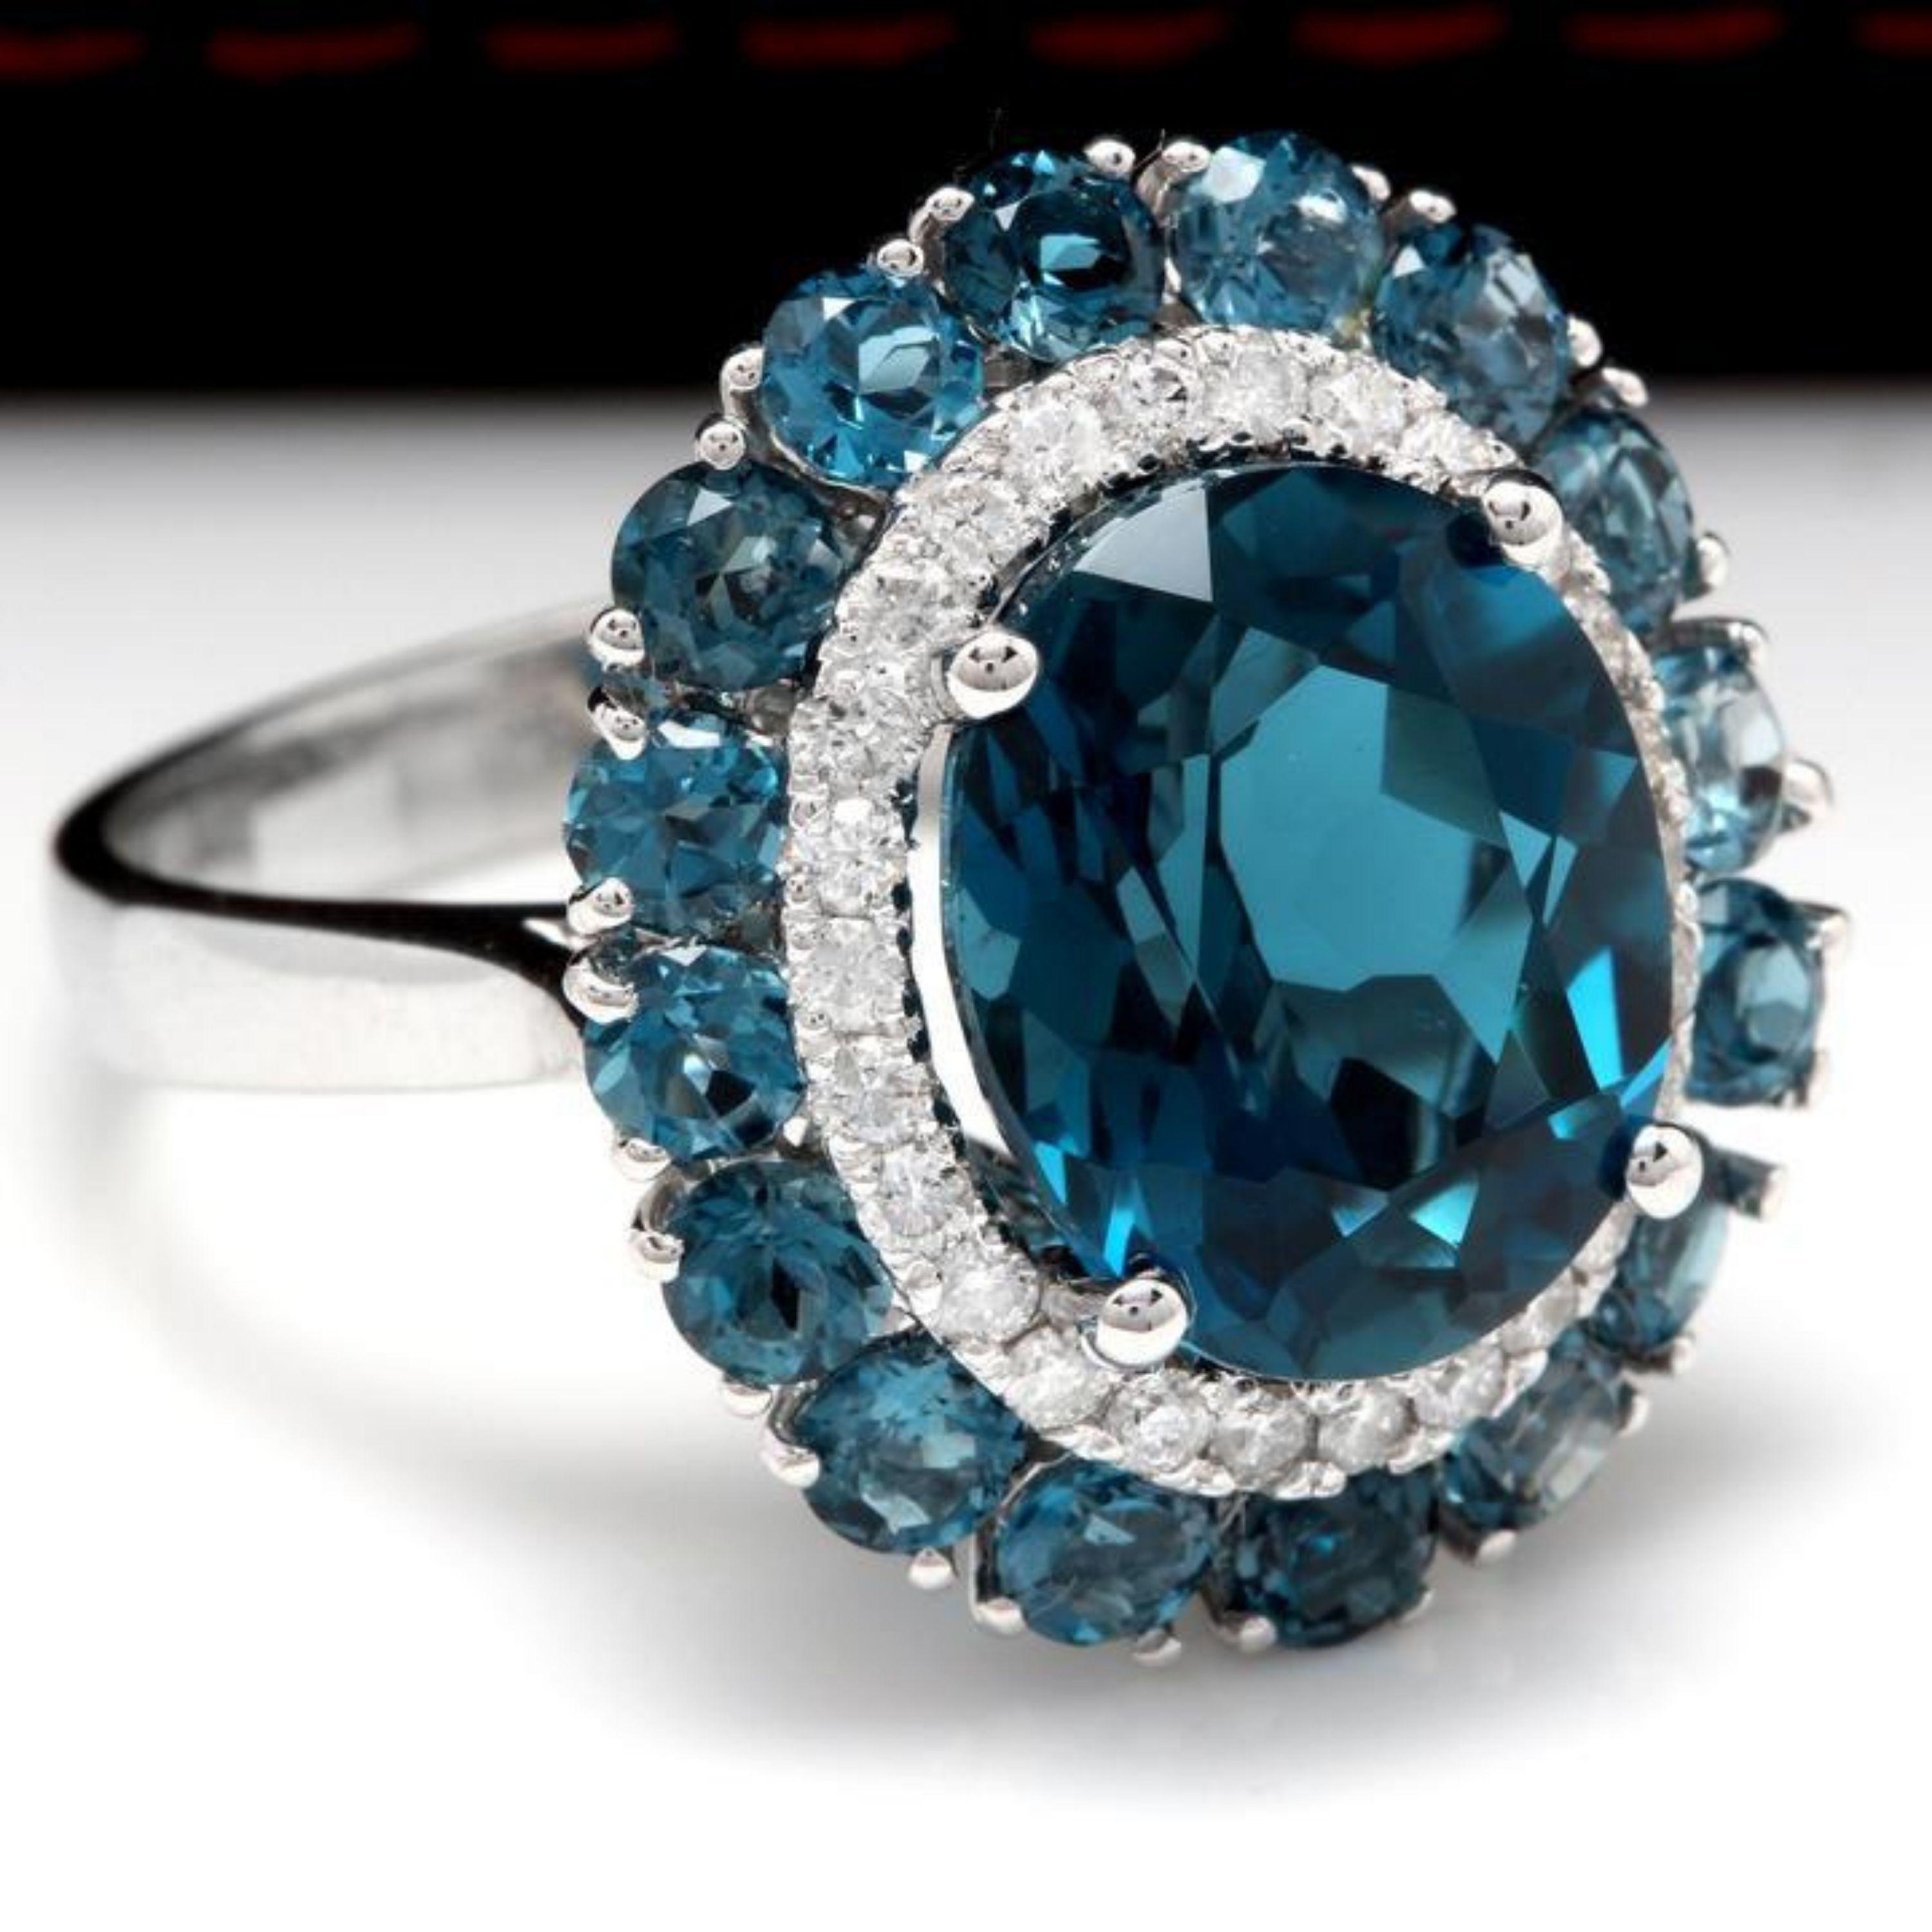 8.45 Carats Natural Impressive London Blue Topaz and Diamond 14K White Gold Ring

Total Natural London Blue Topaz Weight: Approx. 8.00 Carats

Center Topaz Weight is Approx. 7.00 Carats

Center London Blue Topaz Measures: Approx. 12.00 x